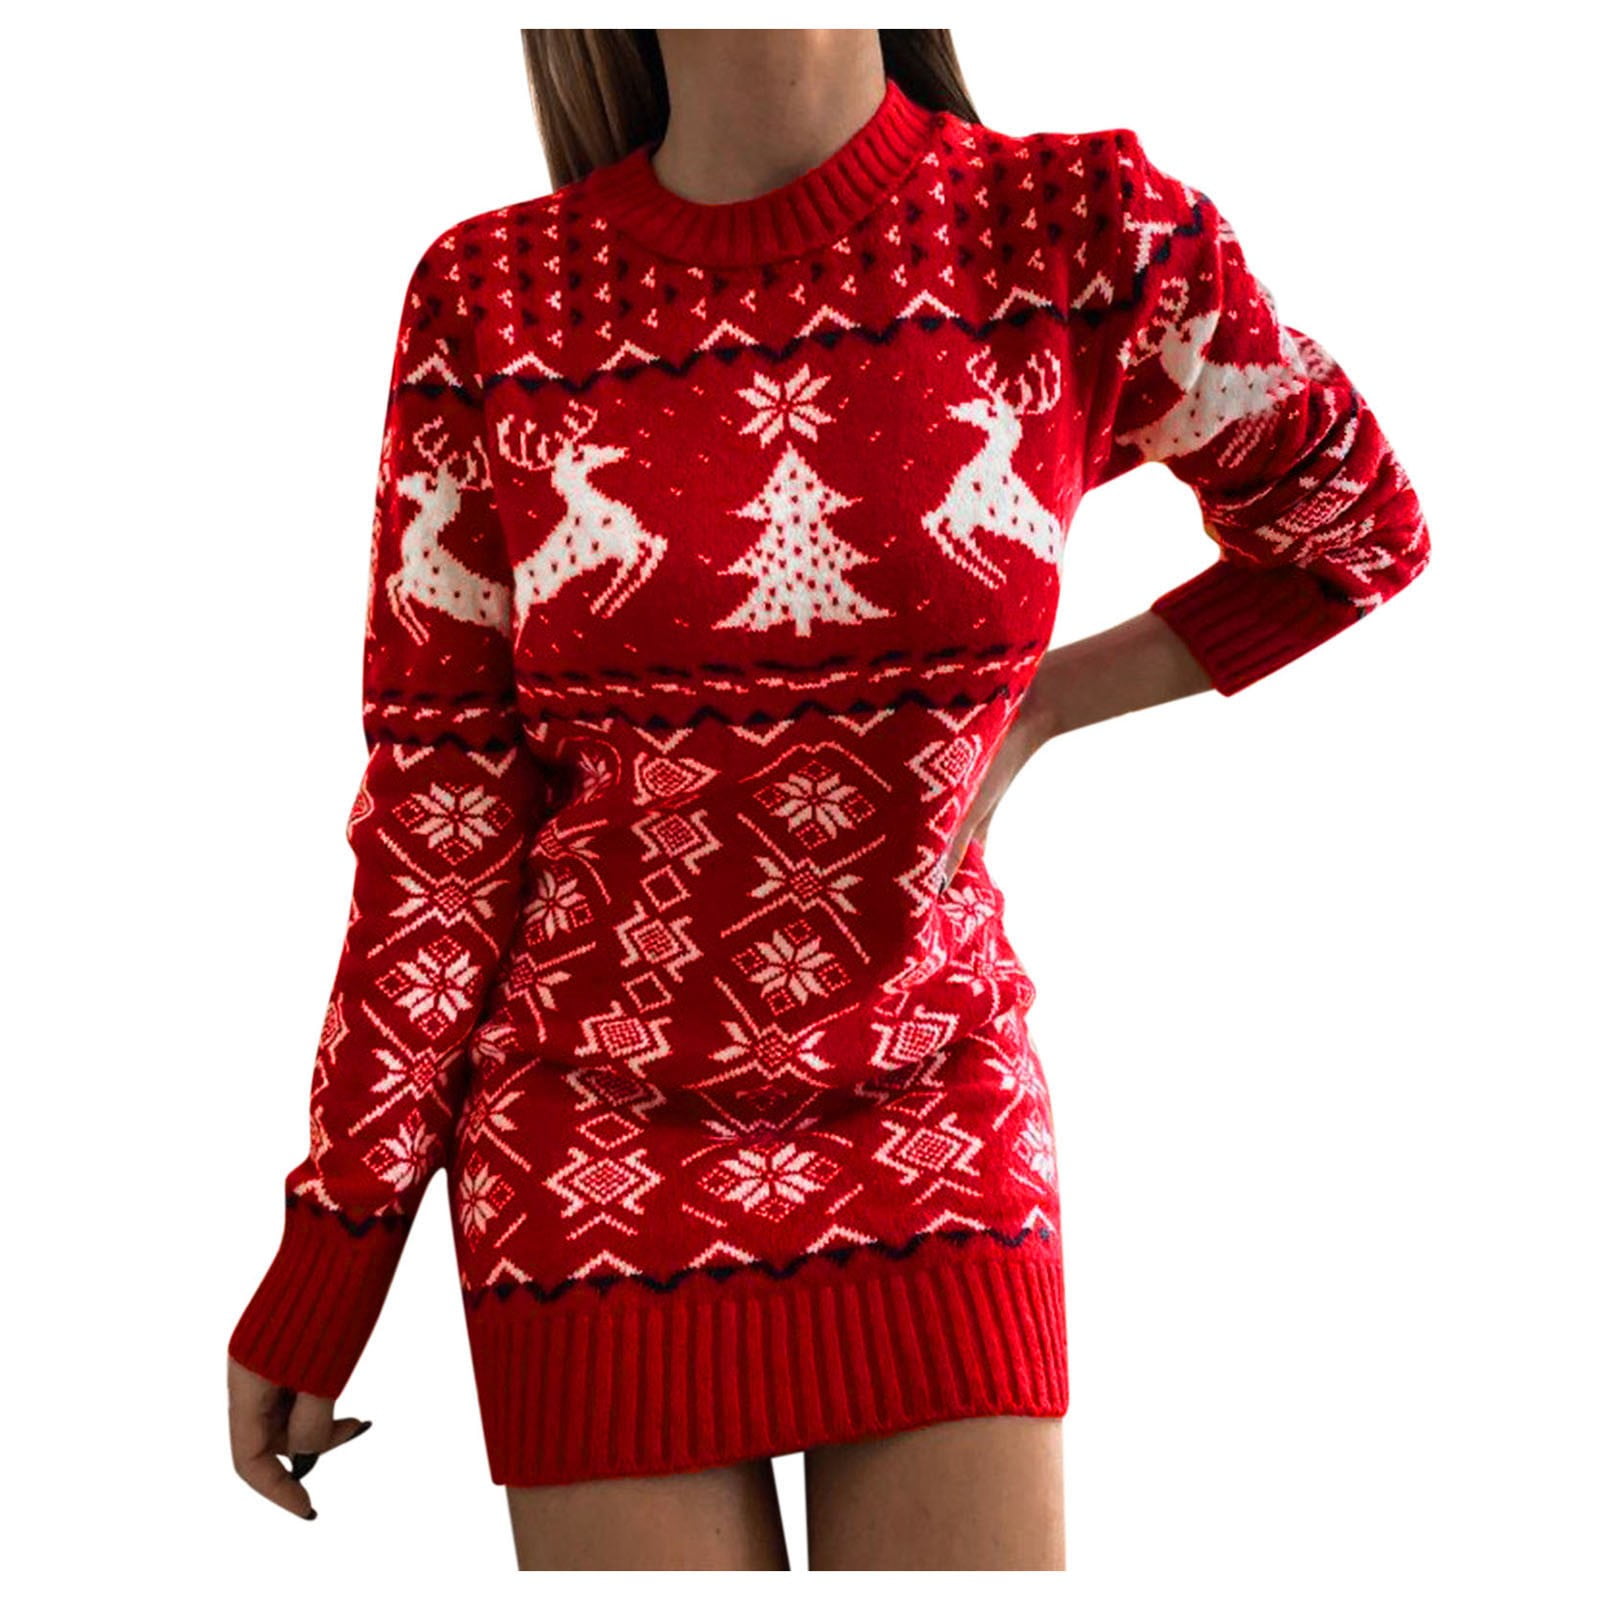 Ladies Womens Christmas Oversized Knitted Elf Costume Baggy Xmas Jumper Dress